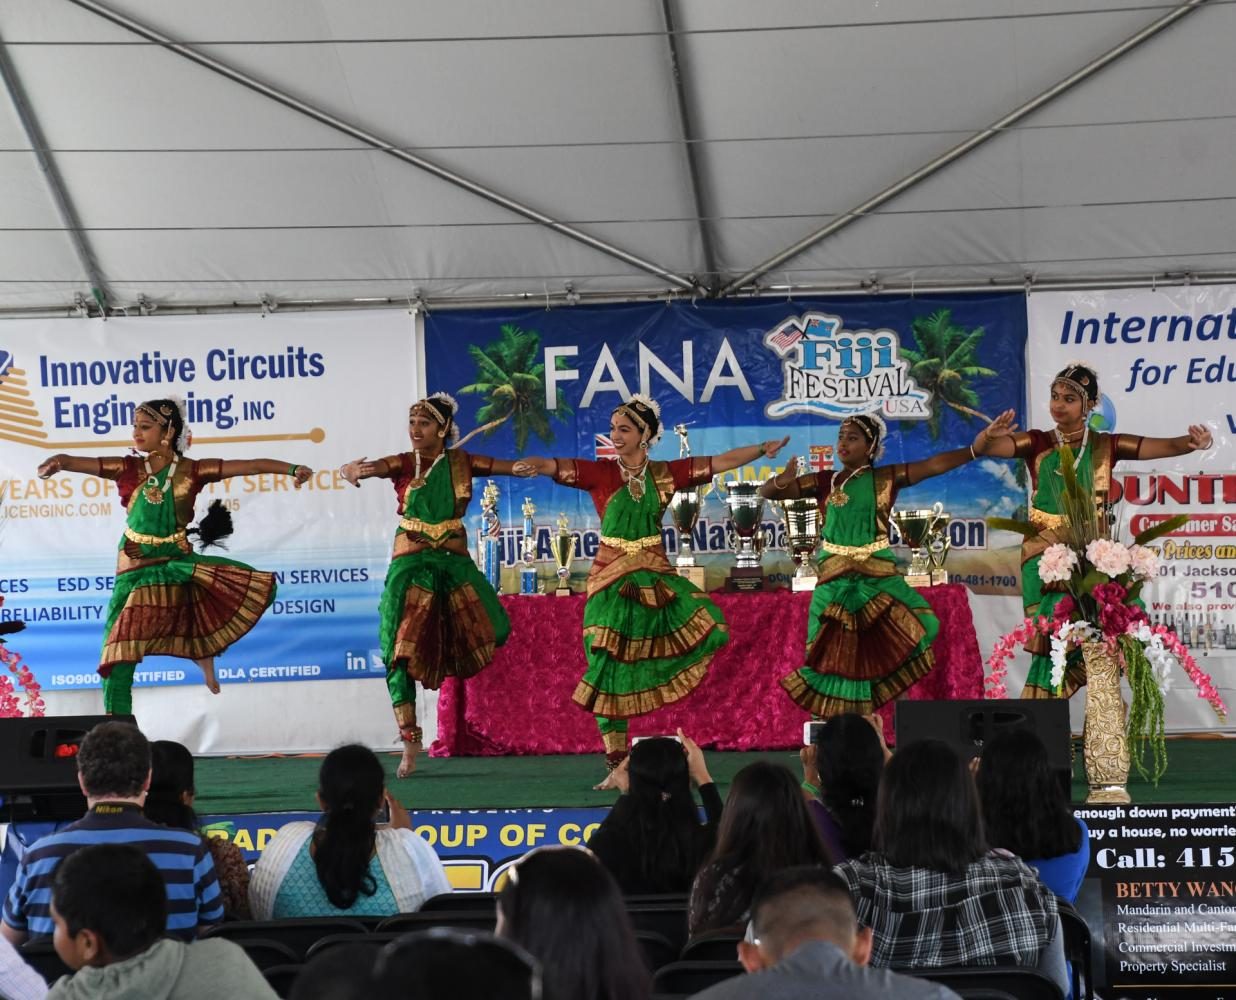 Traditional+Indian-Fijian+dancers+perform+for+the+crowd+at+the+15th+annual+Fiji+Festival+at+the+Cal+State+East+Bay+Hayward+campus+on+Saturday.+The+event+featured+food%2C+music%2C+dance+conpetitions%2C+flag+football%2C+rugby%2C+soccer%2C+kava%2C+face+painting%2C+a+DJ+and+much+more.